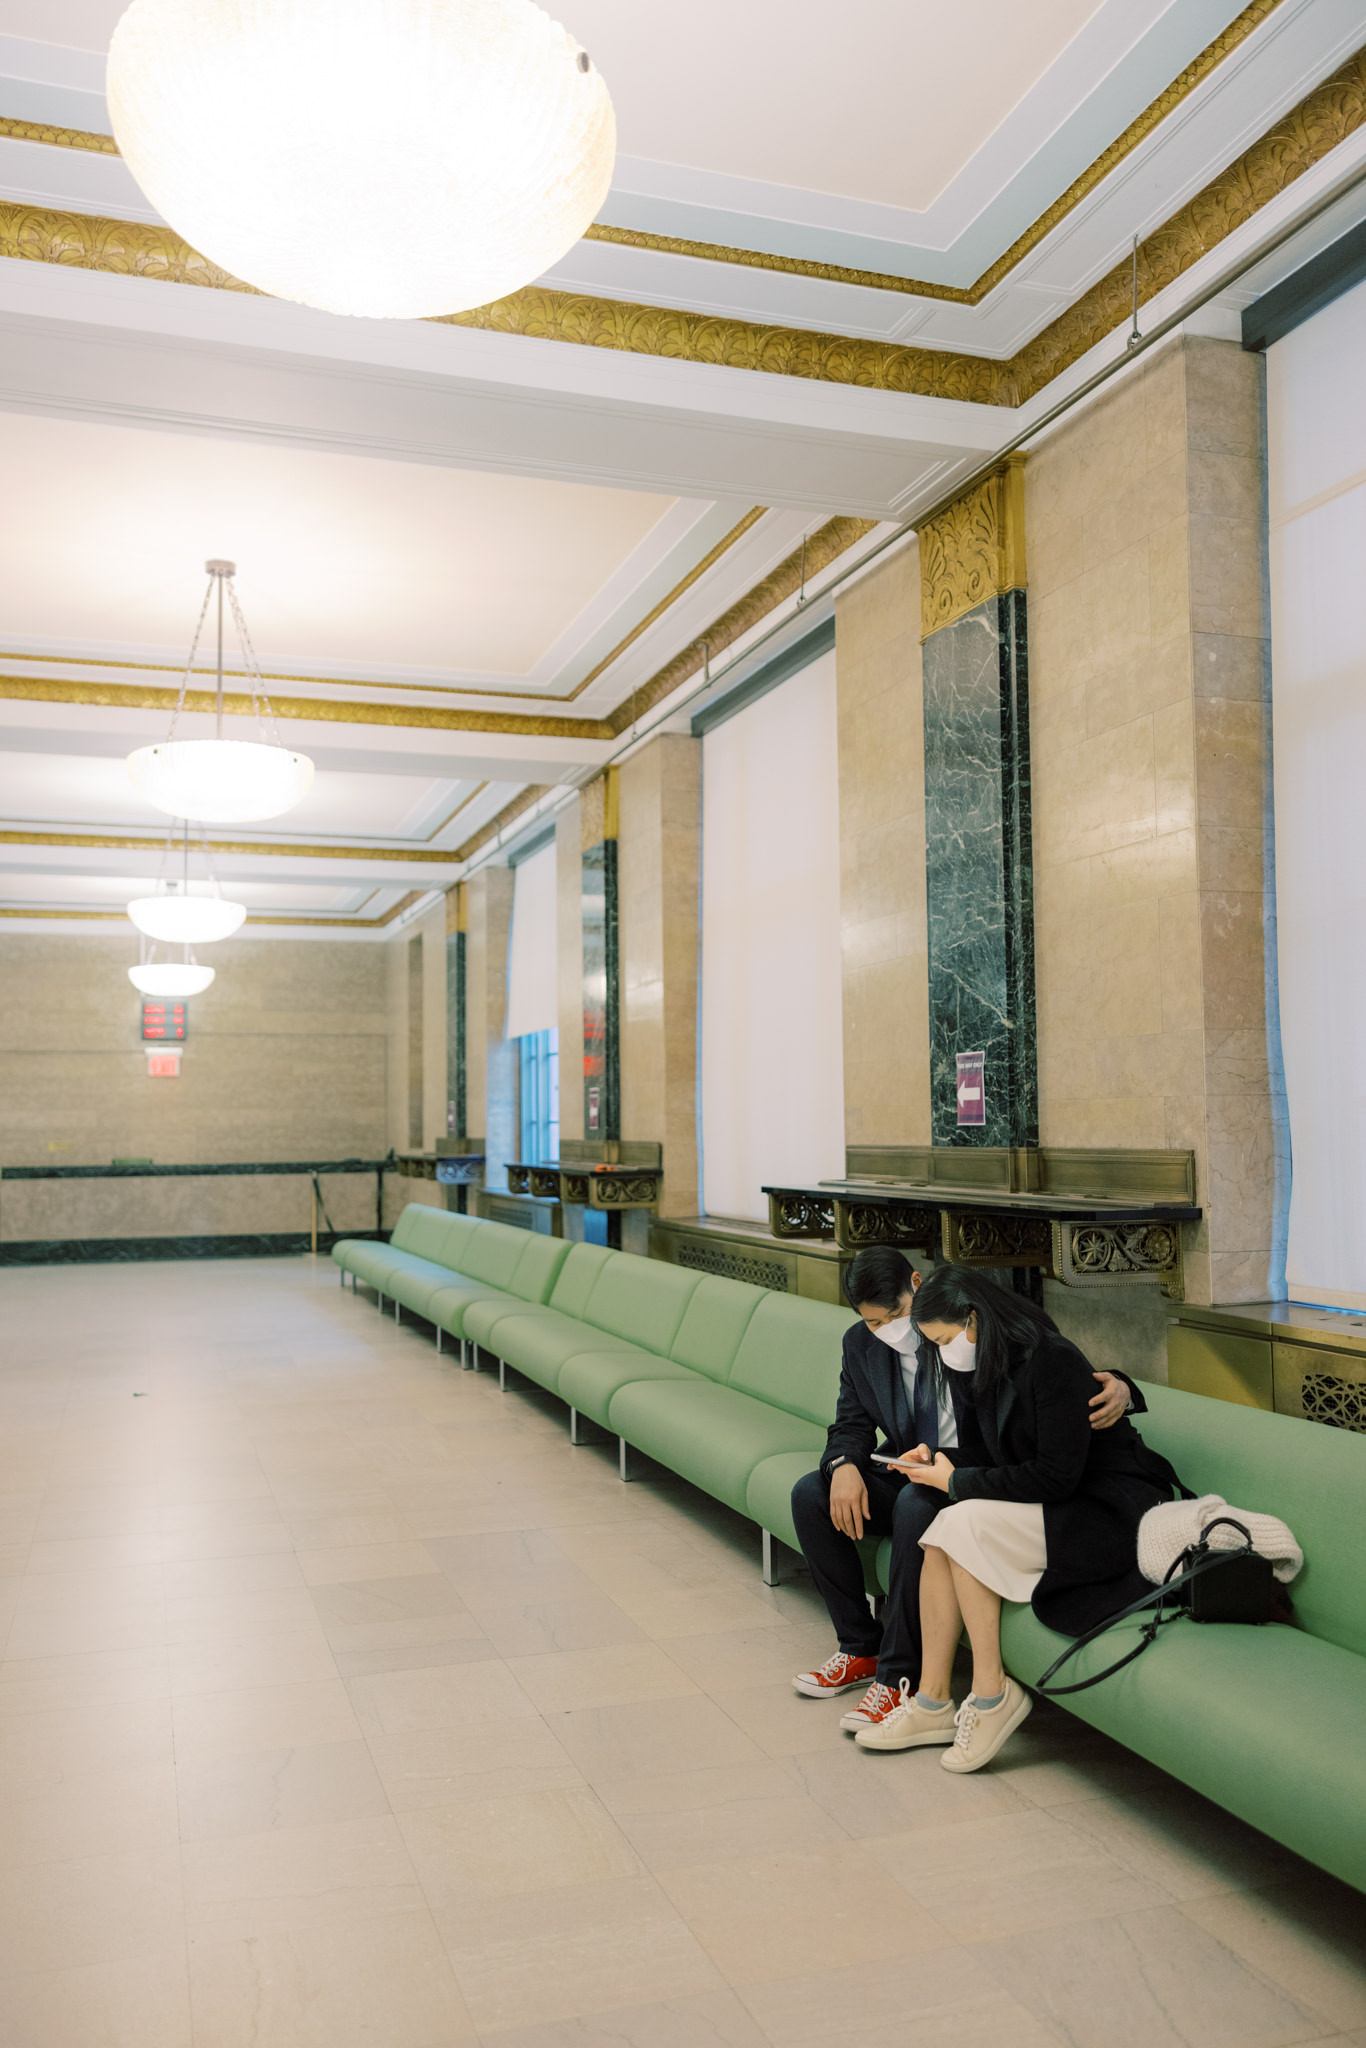 The bride and groom are waiting for the ceremony to start. 2022 city hall wedding in NYC photo by Jenny Fu Studio